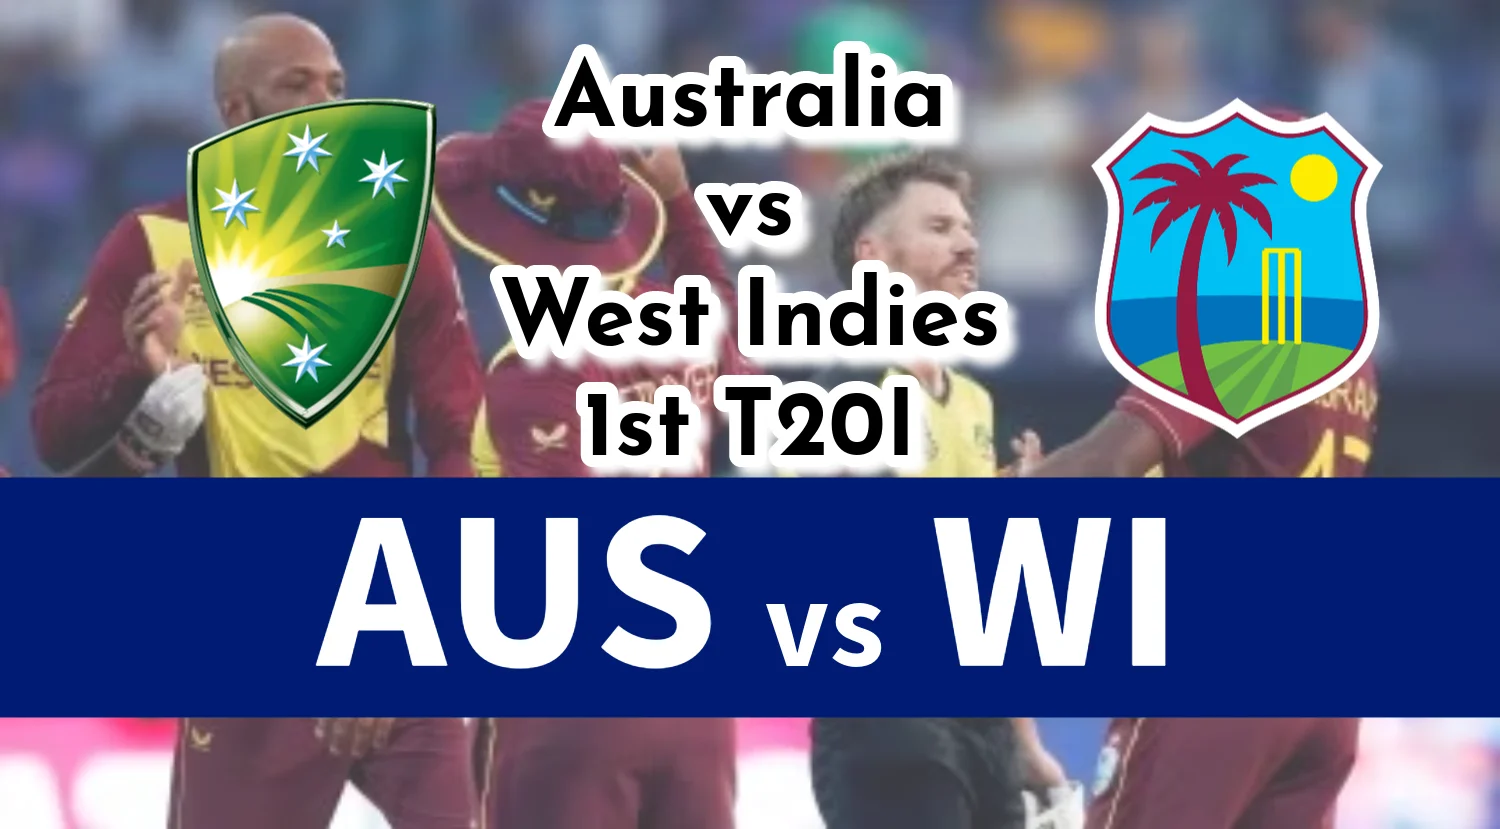 AUS vs WI 1st T20I Dream 11 Prediction, Check Australia vs West Indies Probable XI, Match Prediction, Pitch Report and Weather Report Now